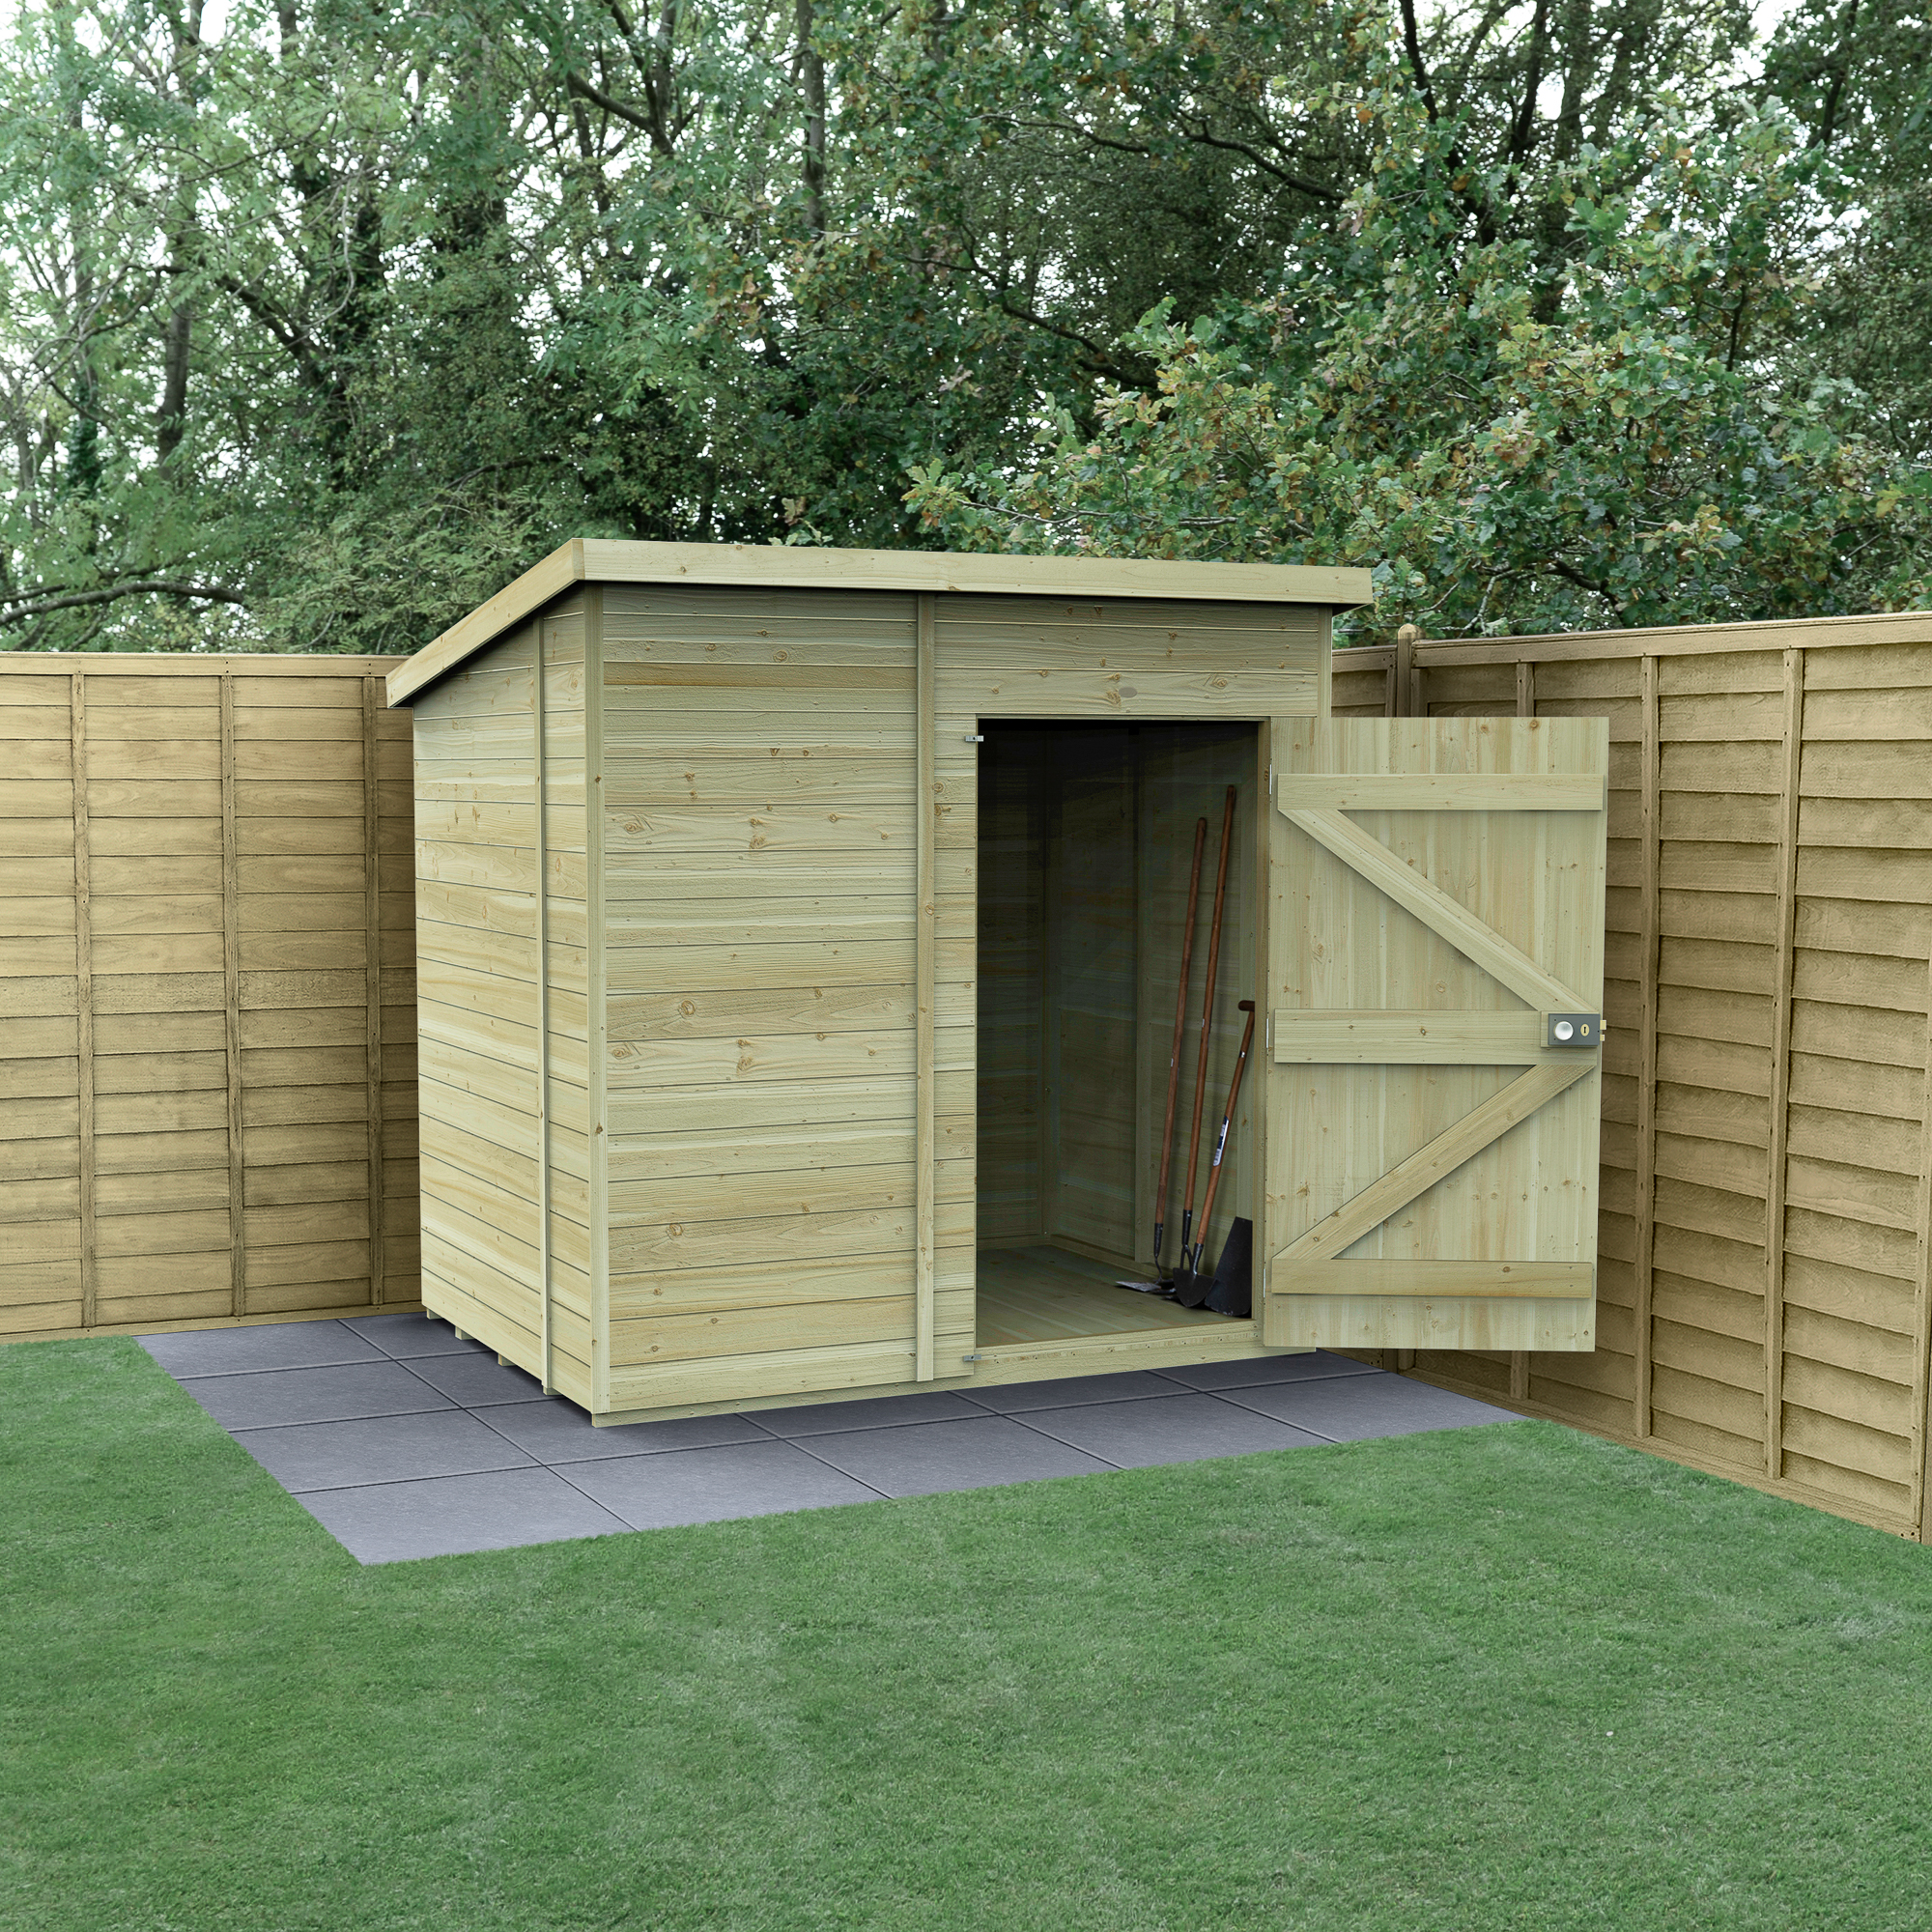 Forest Garden Timberdale 7 x 5ft Pent Tongue & Groove Pressure Treated Windowless Shed